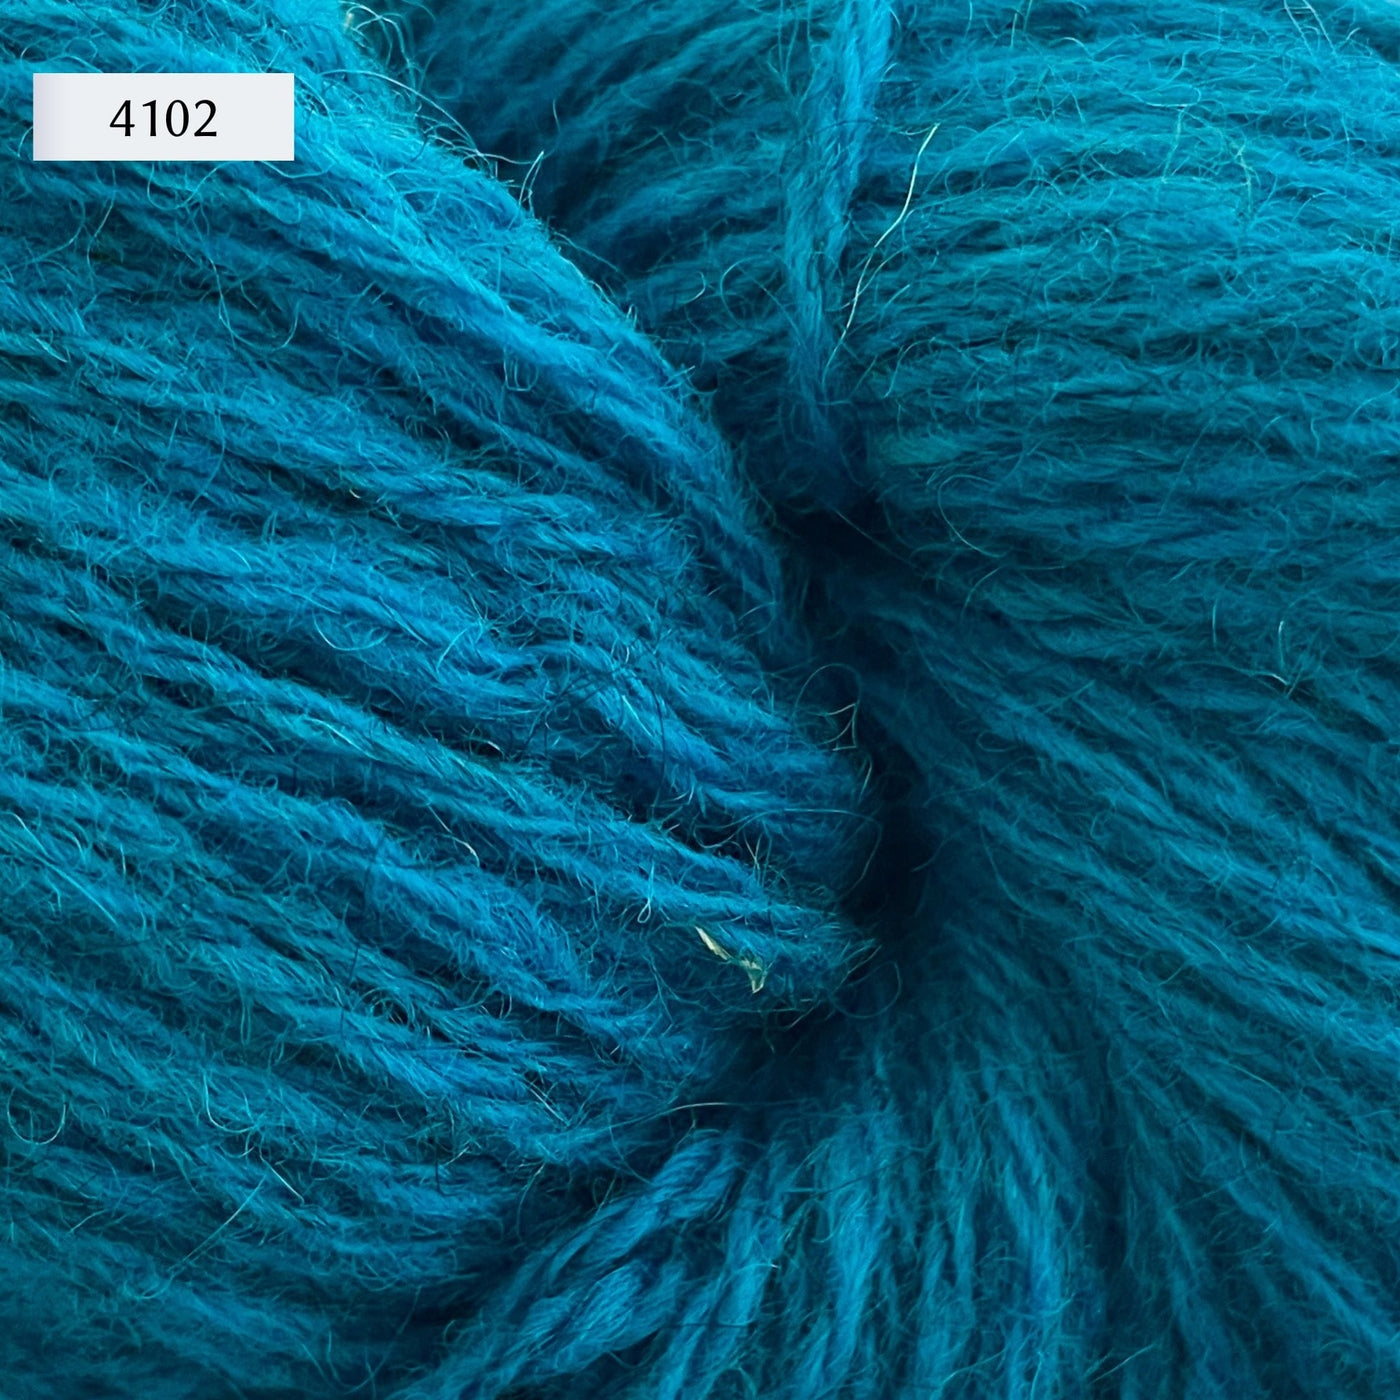 Ullcentrum 3ply, a worsted weight wool yarn, in color 4102, a bright turquoise blue